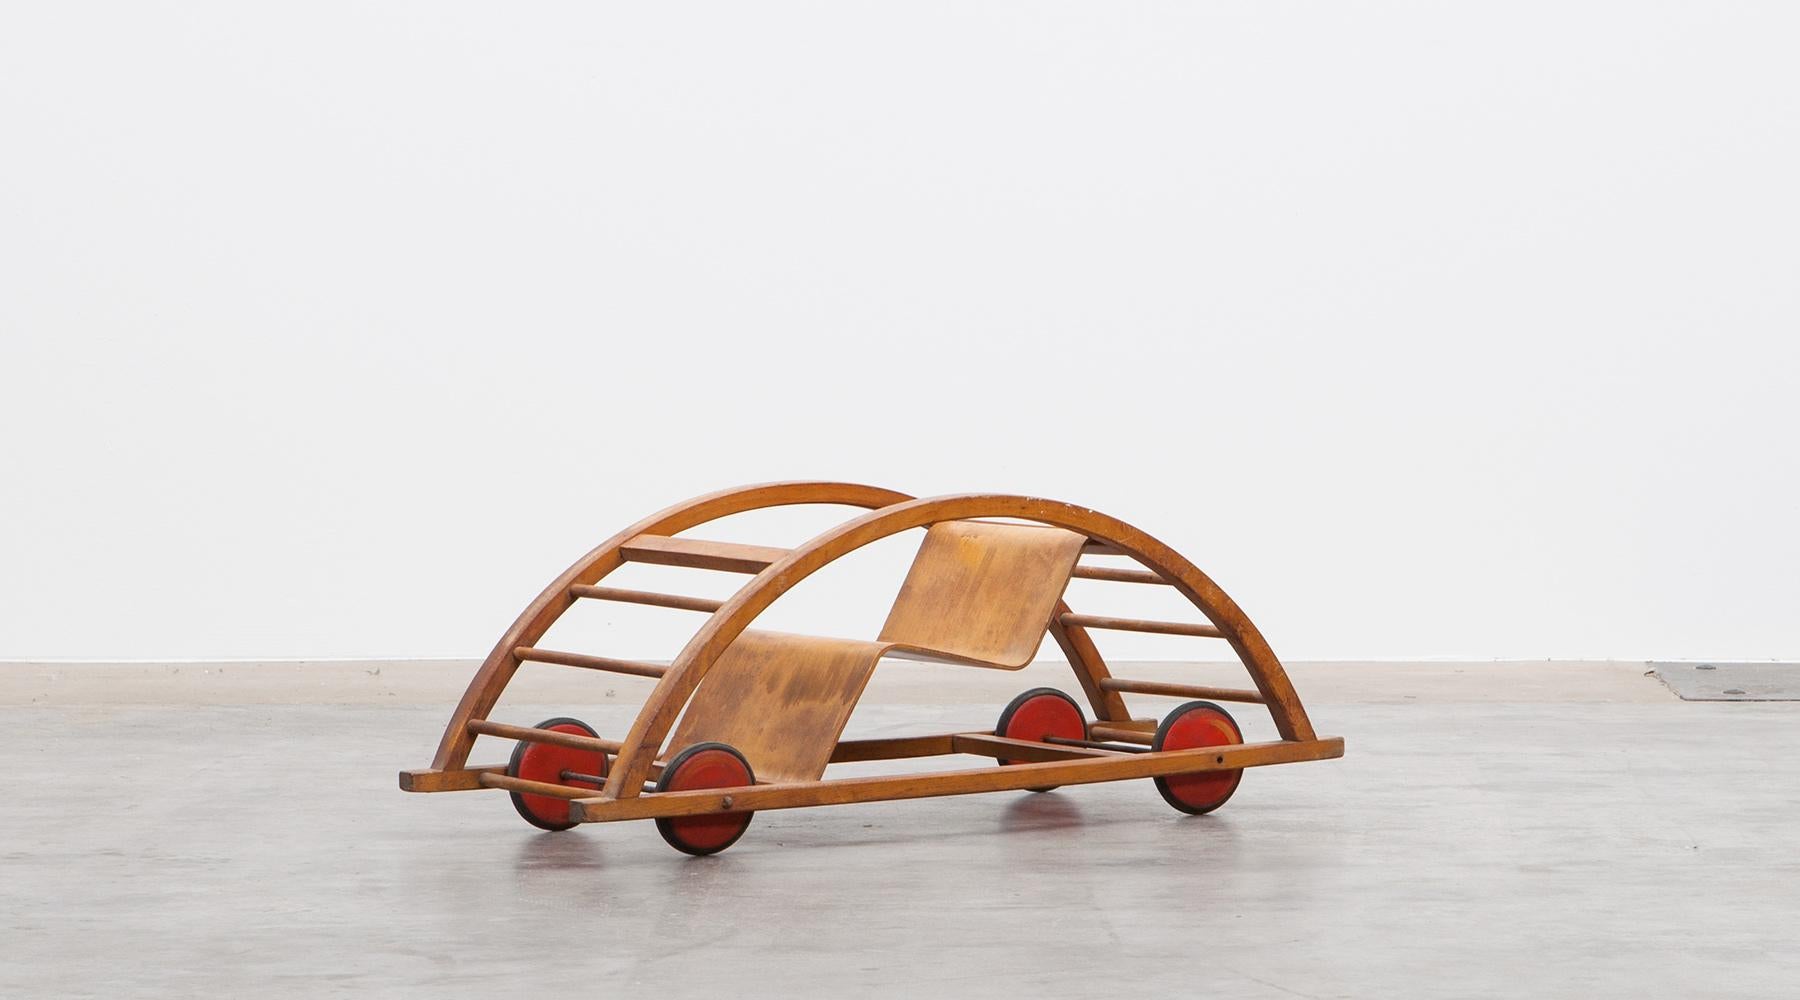 Swing cart, children toy in lacquered red wood and metal, Germany, 1951.

Authentic swing cart from the 1950s, unique in shape and workmanship. Designed by Hans Brockhage, a German designer and sculptor from East Germany. The swing cart can be used